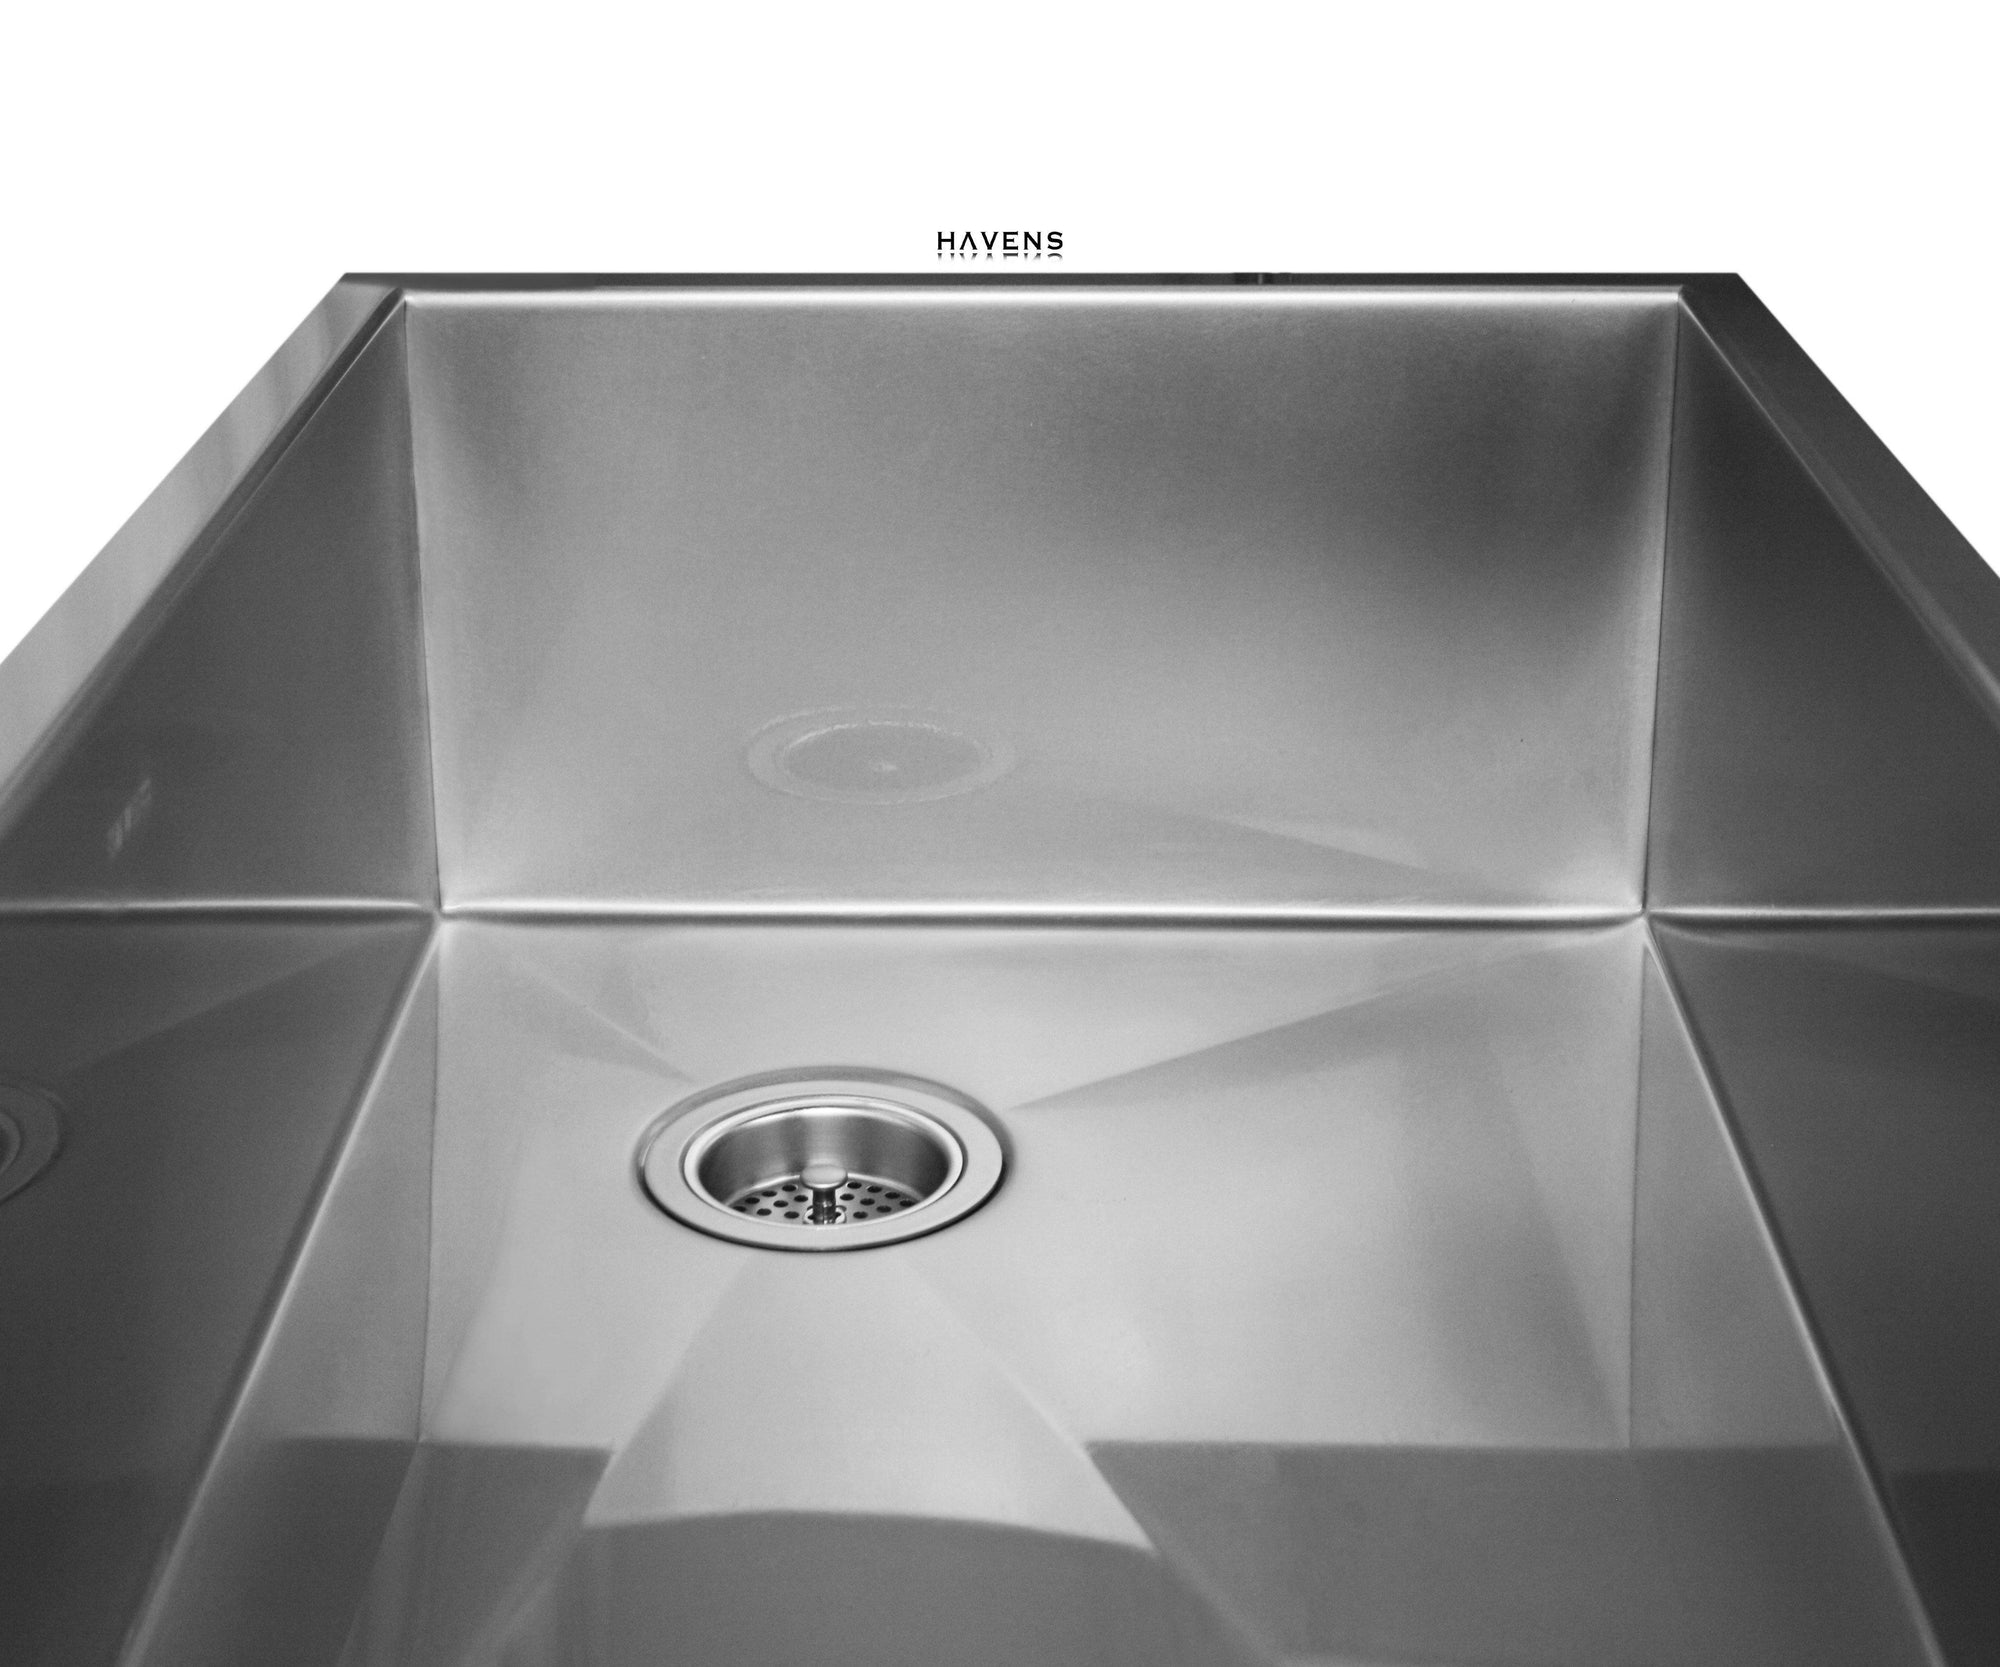 Undermount stainless steel farmhouse sink with a right rear drain.